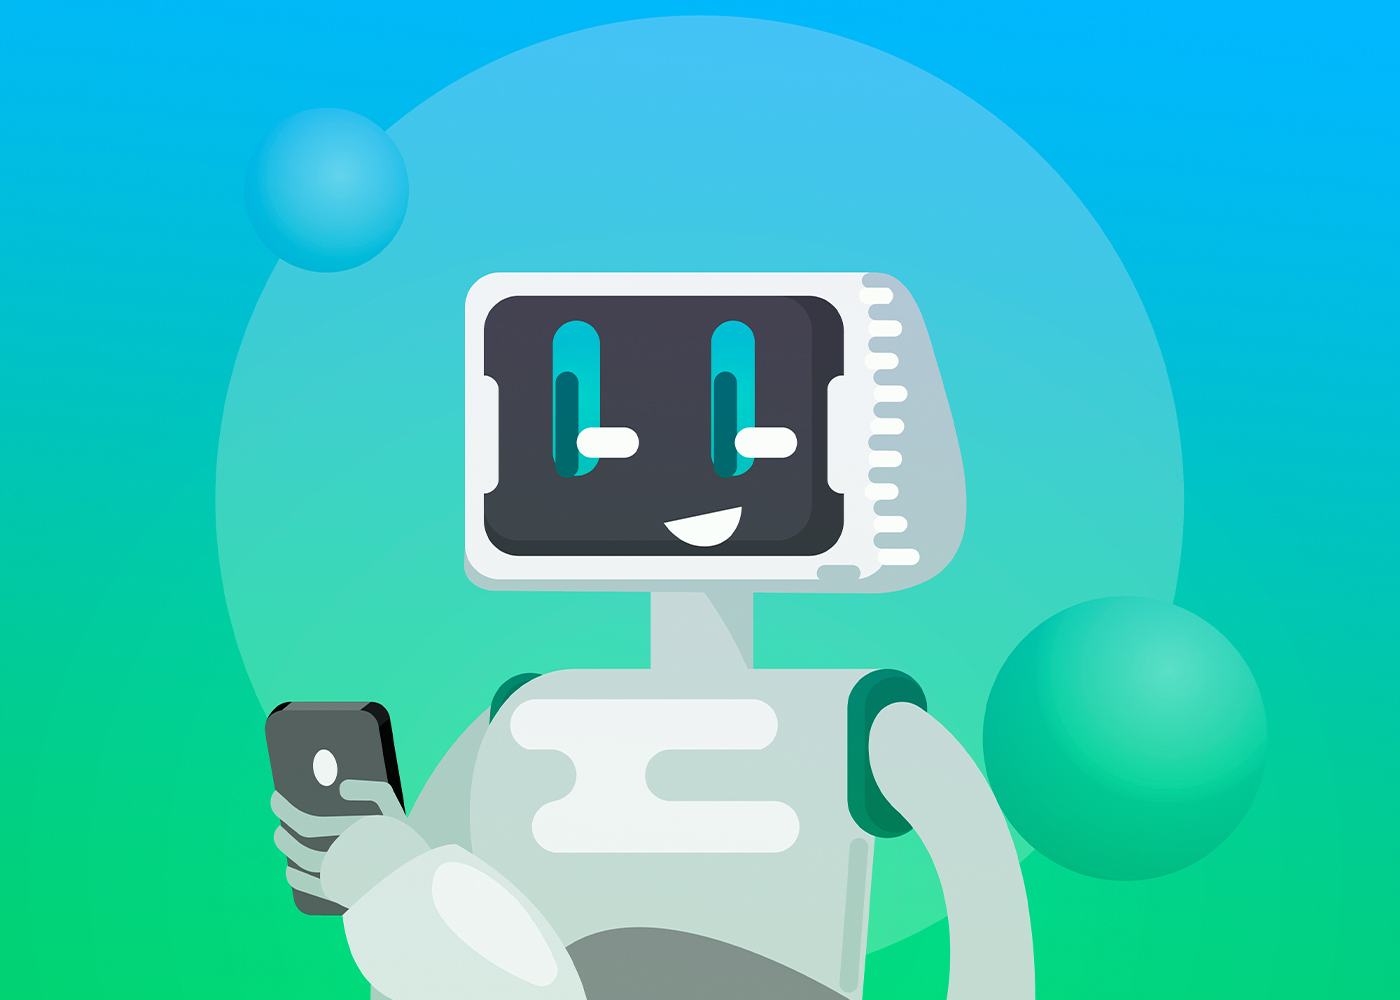 Chatbots in the Metaverse: A Vision of the Future